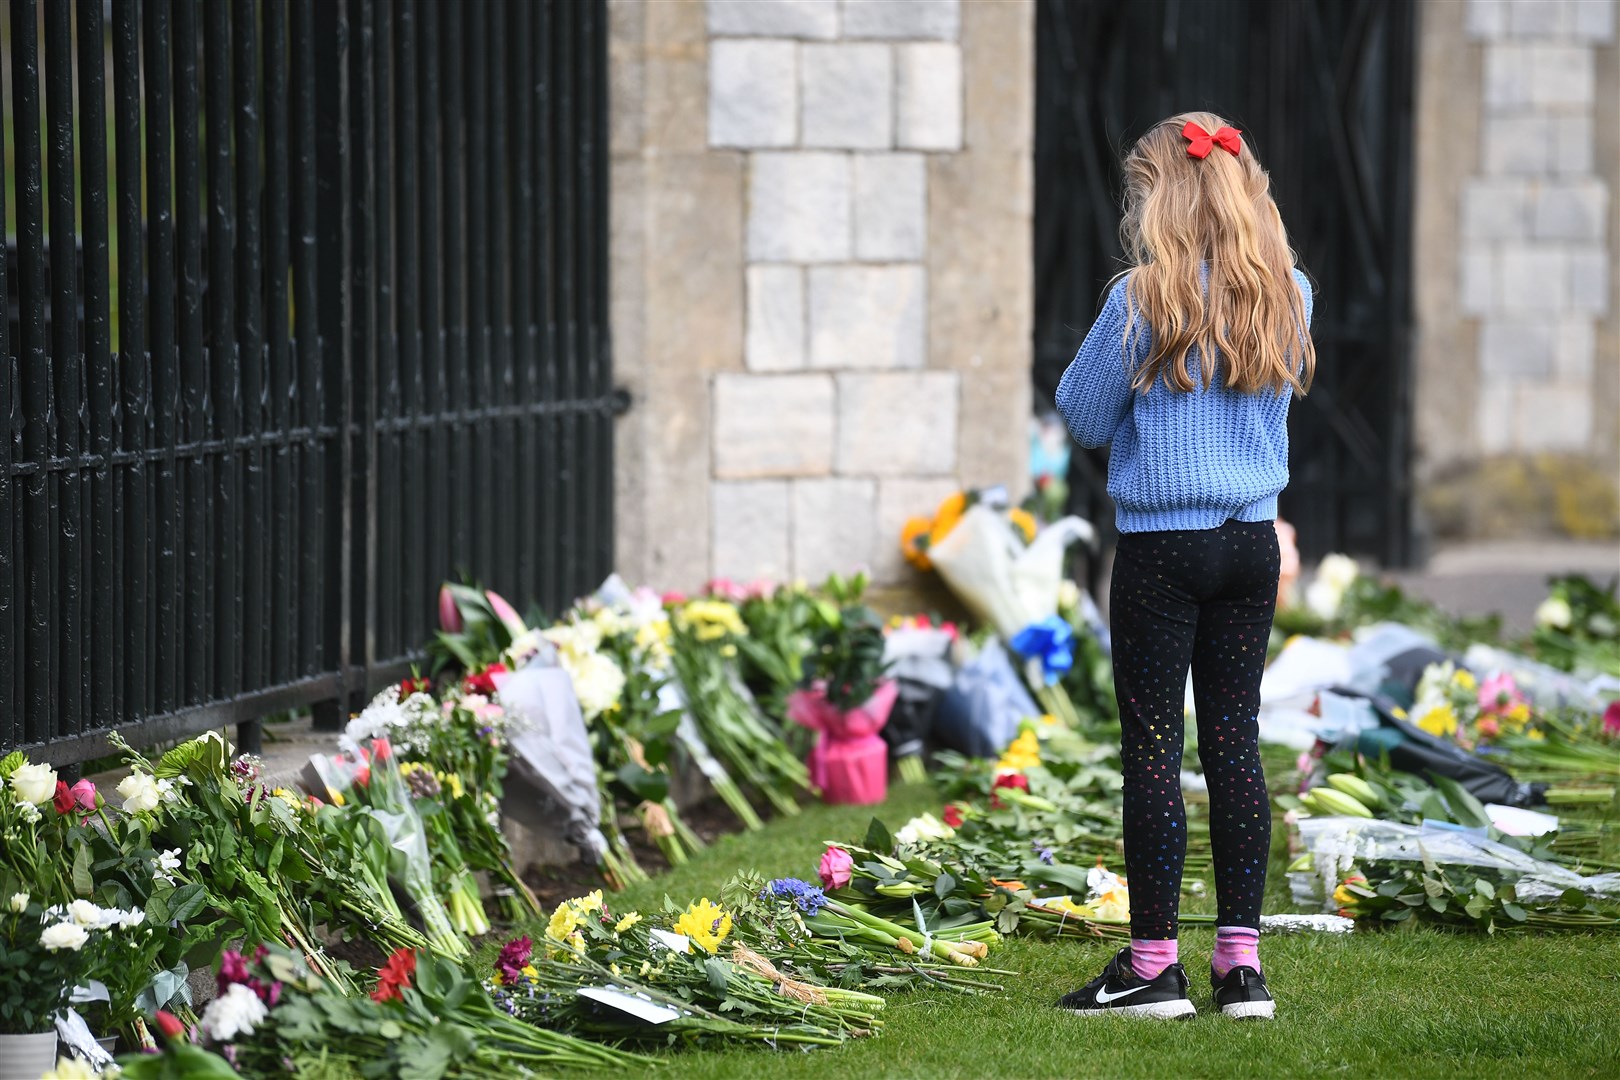 A young girl looks at flowers at Cambridge Gate at Windsor Castle (Victoria Jones/PA)